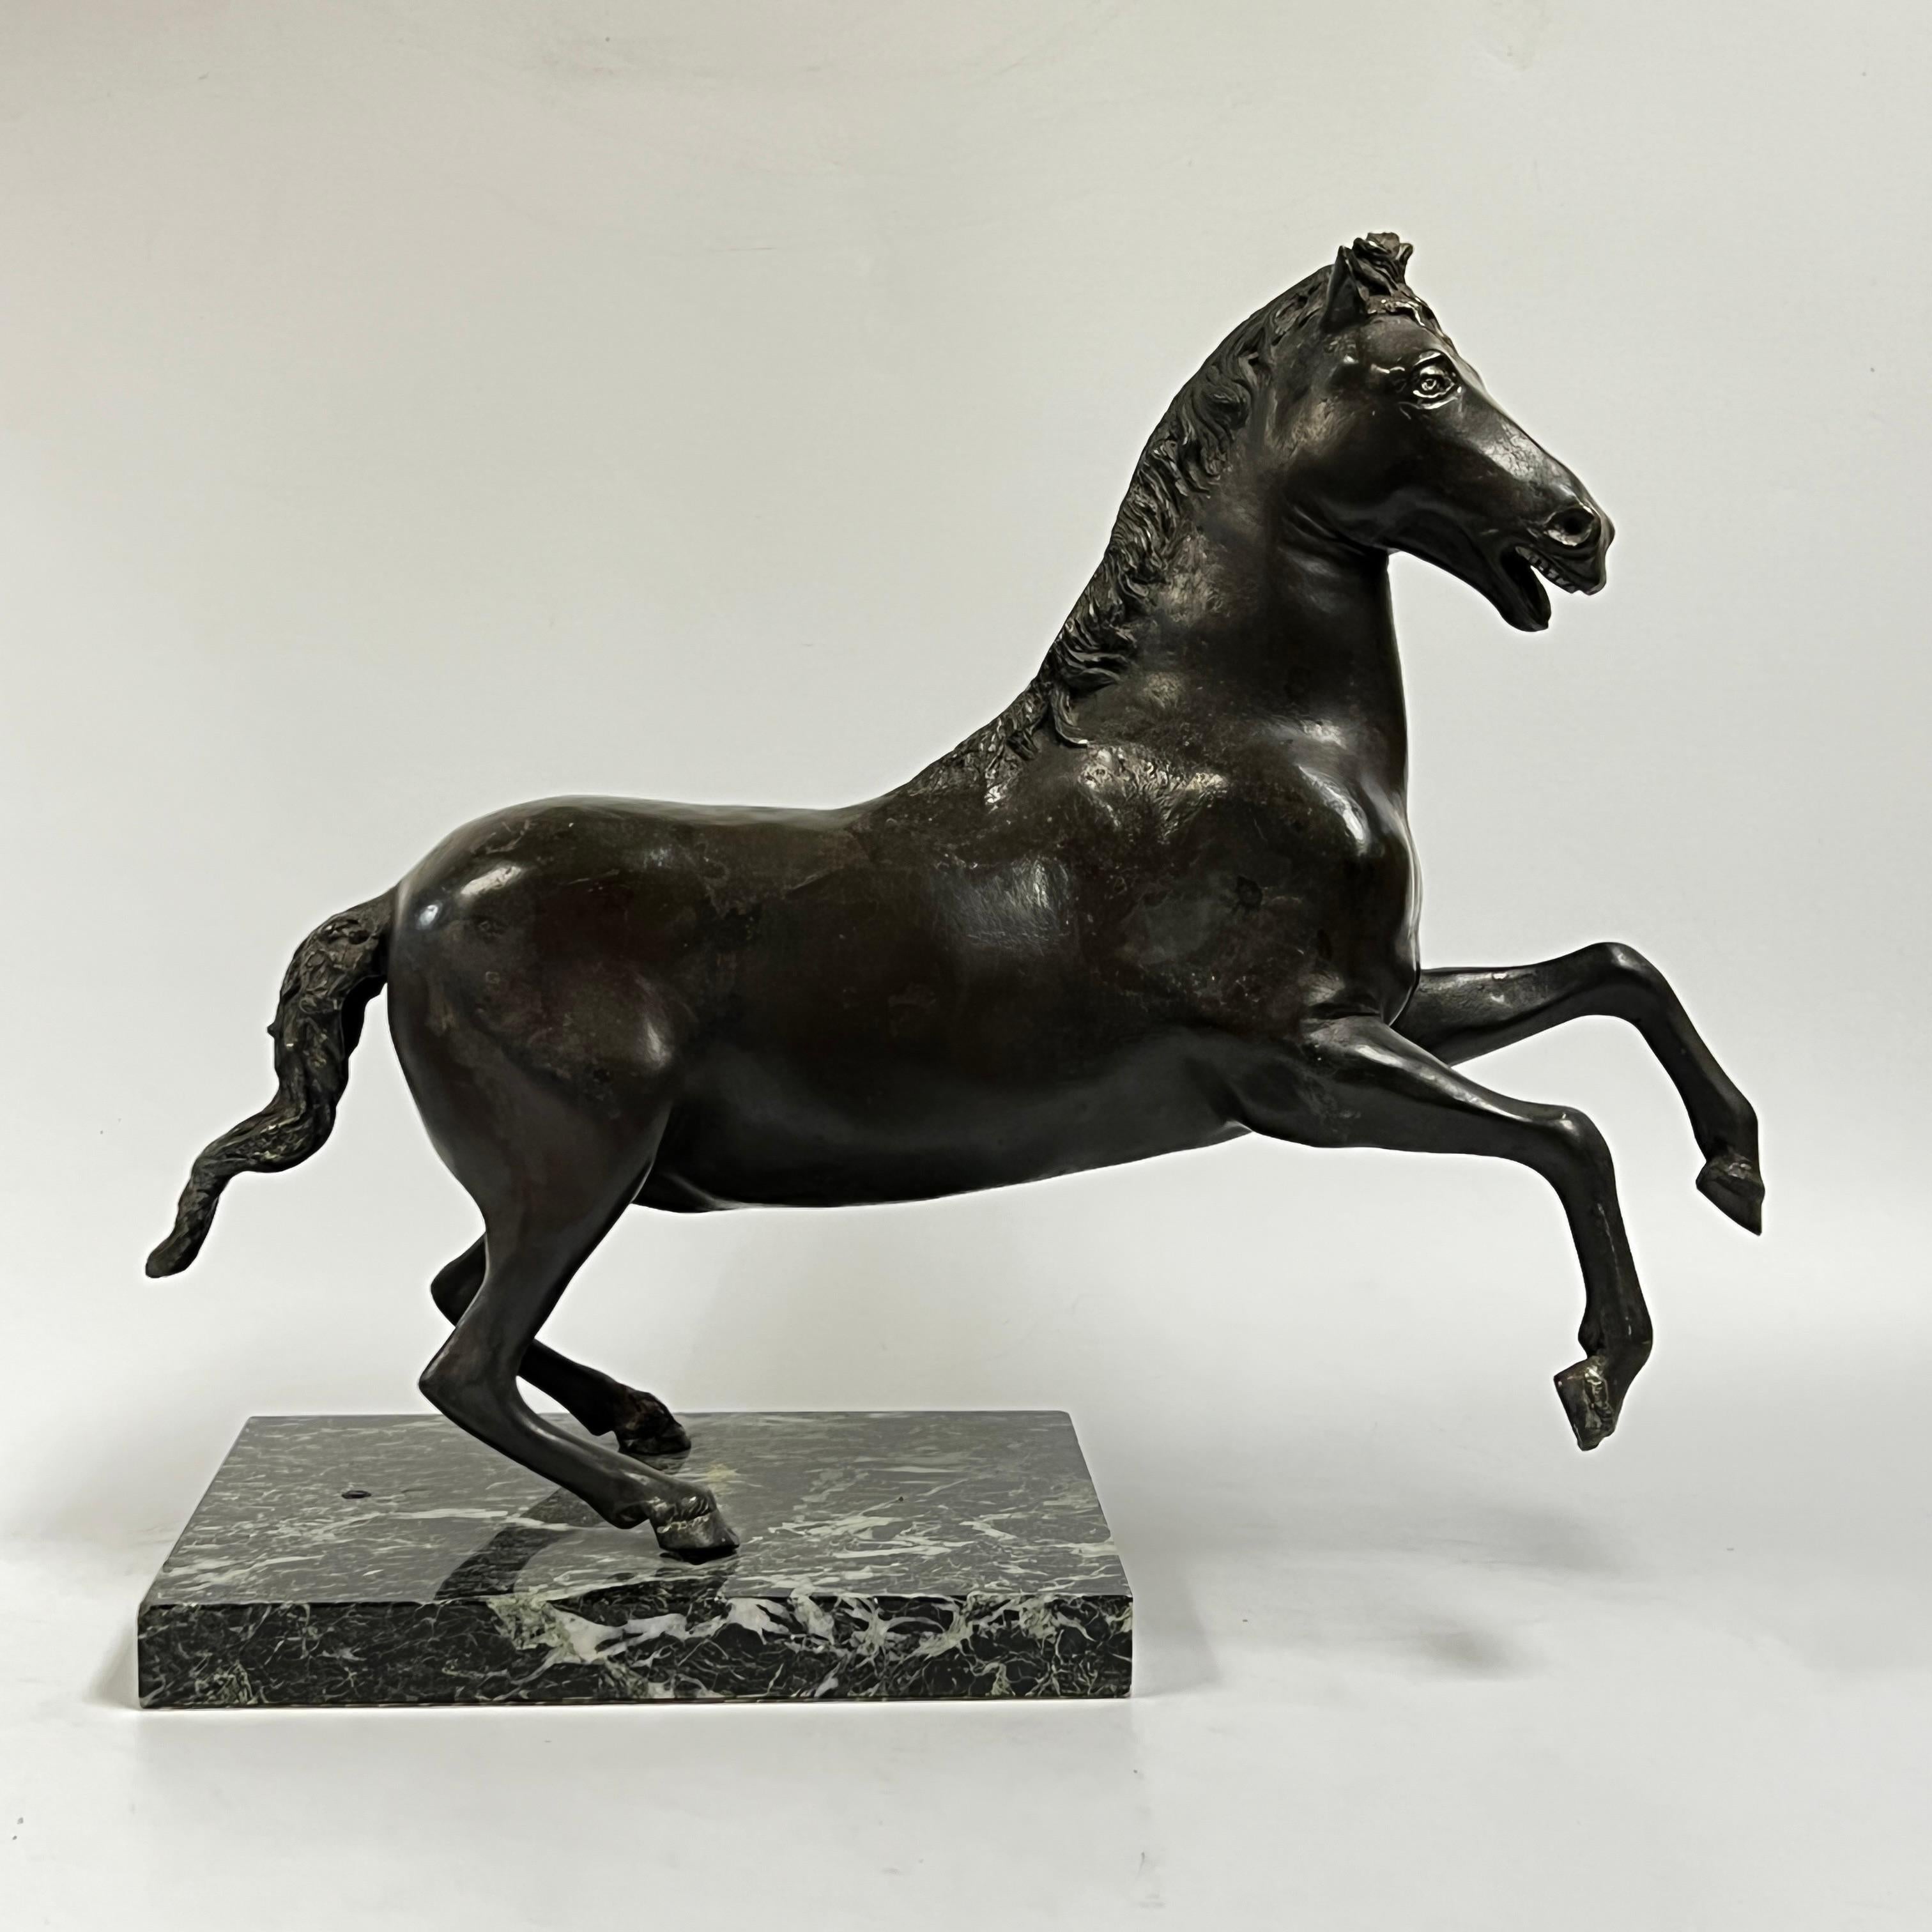 Early 20th Century Bronze Horse Figurine After the Ancient Roman